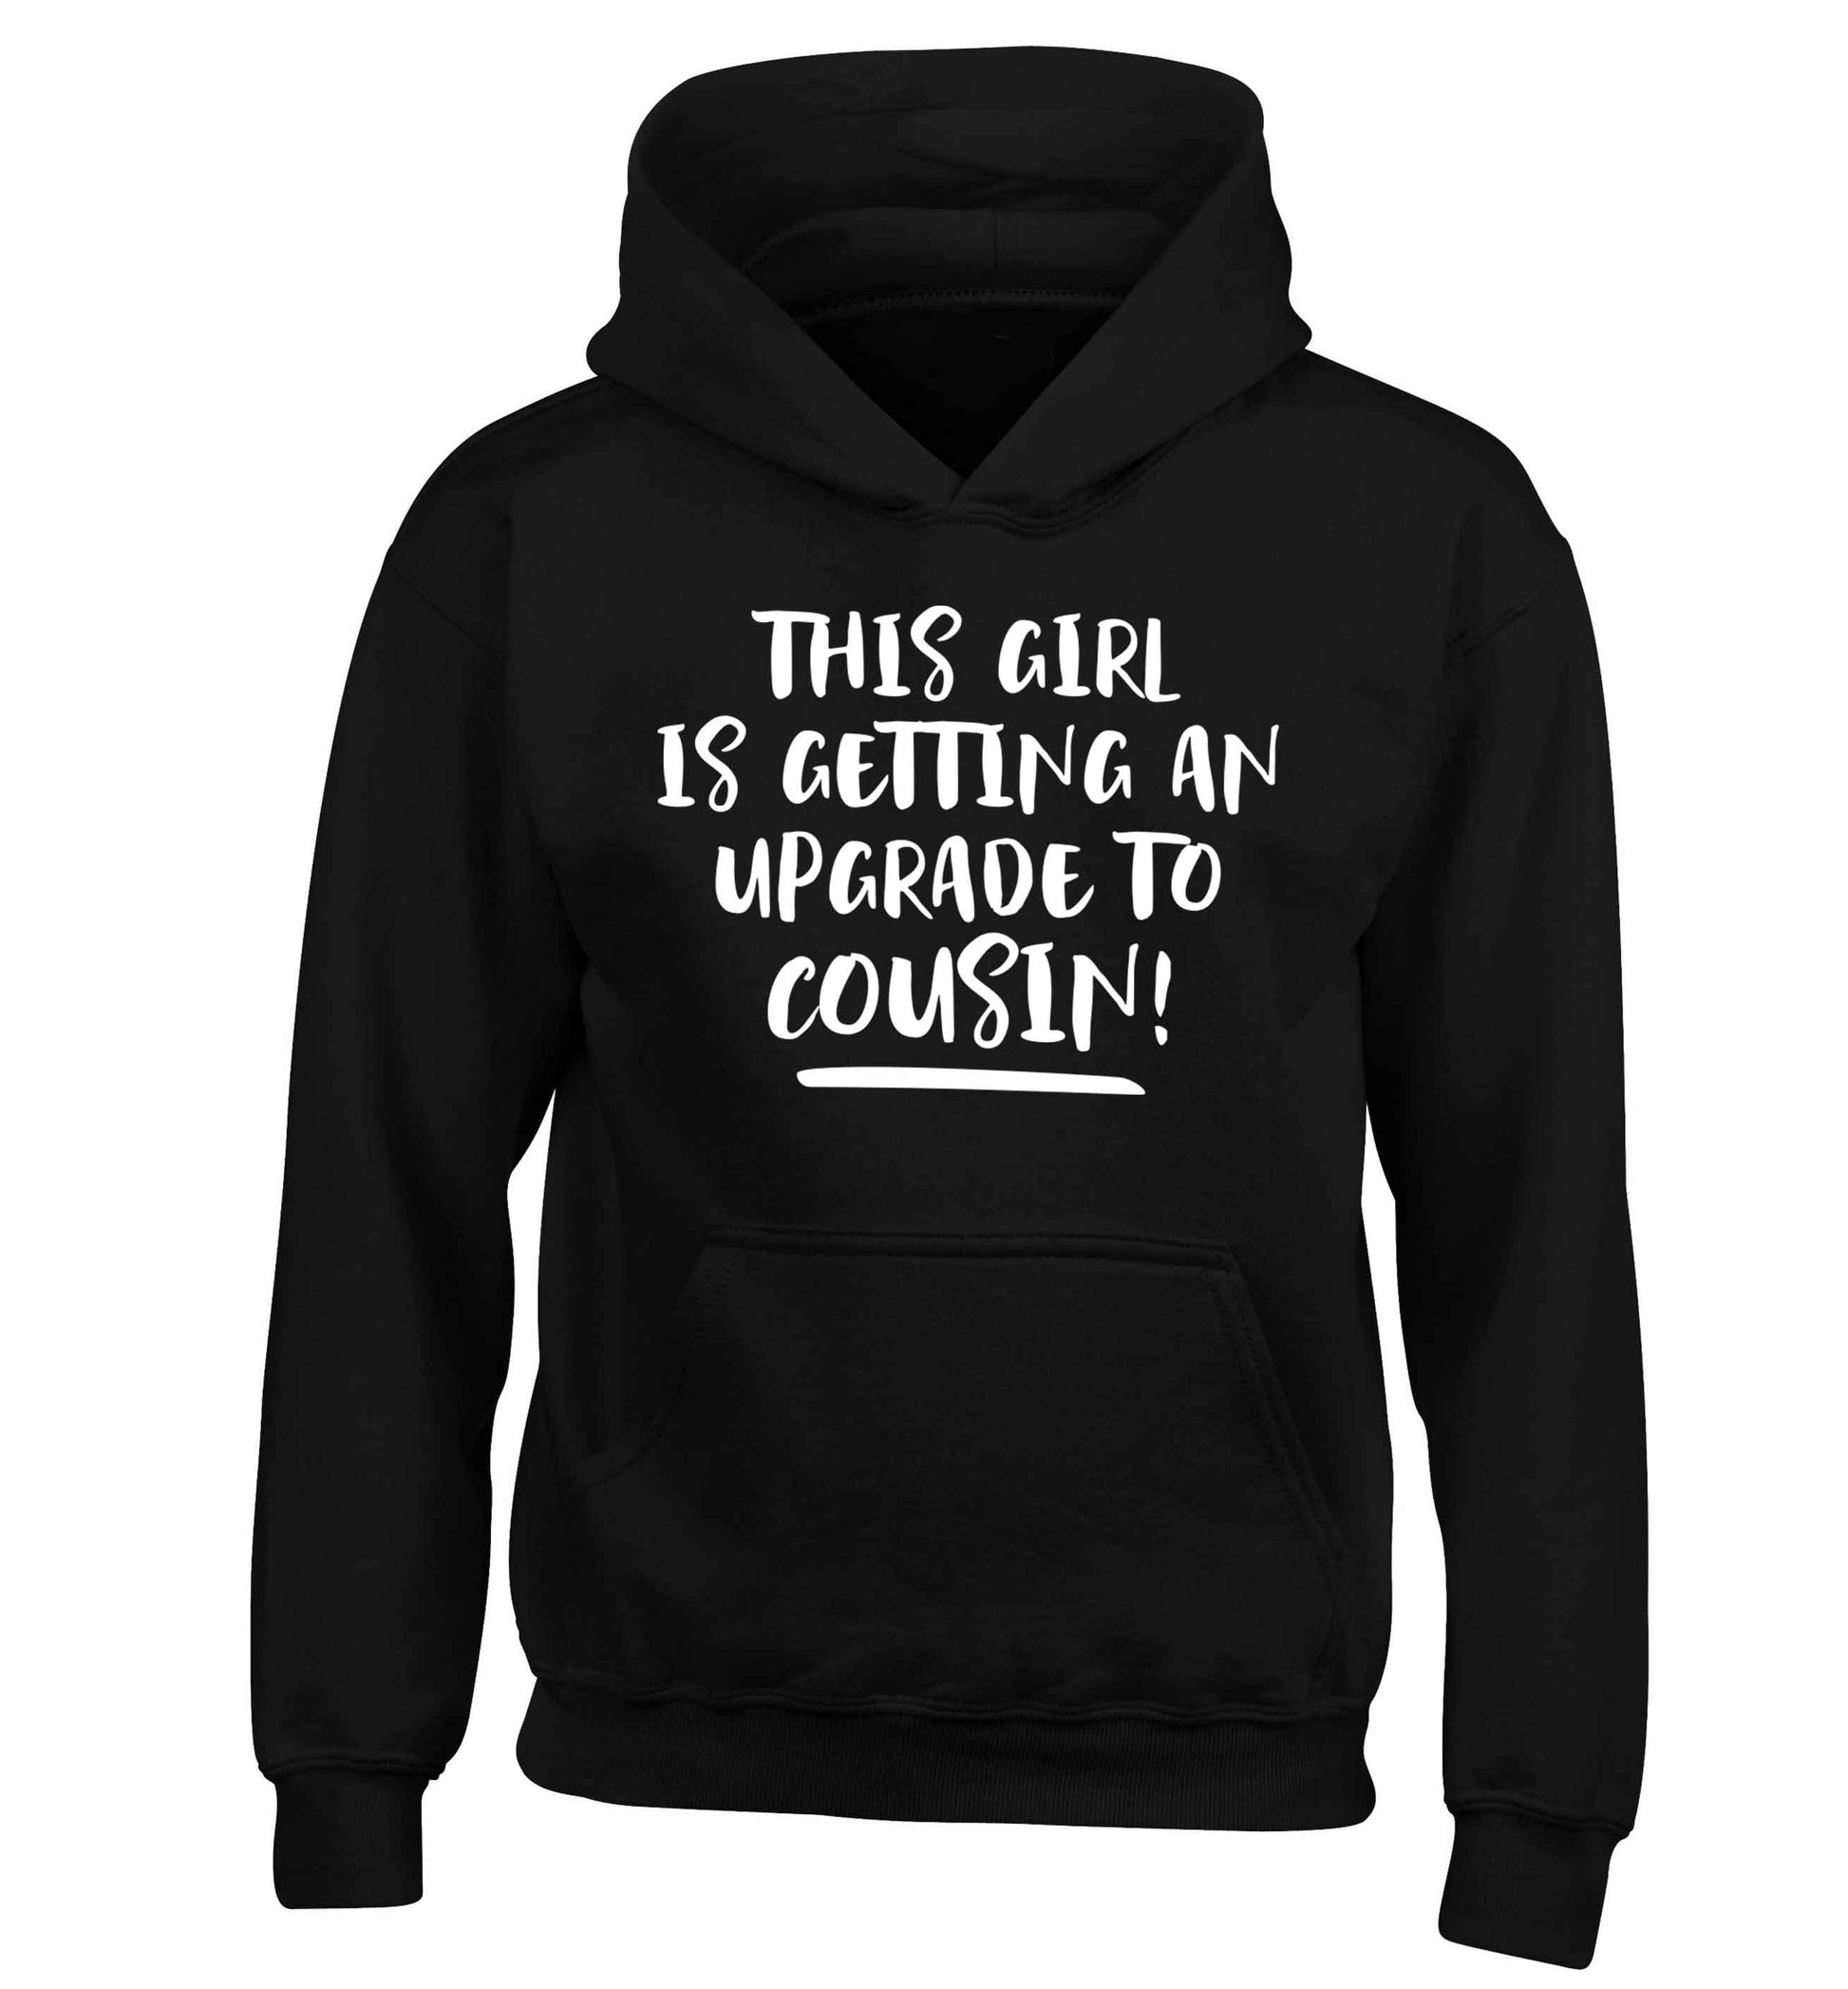 This girl is getting an upgrade to cousin! children's black hoodie 12-13 Years